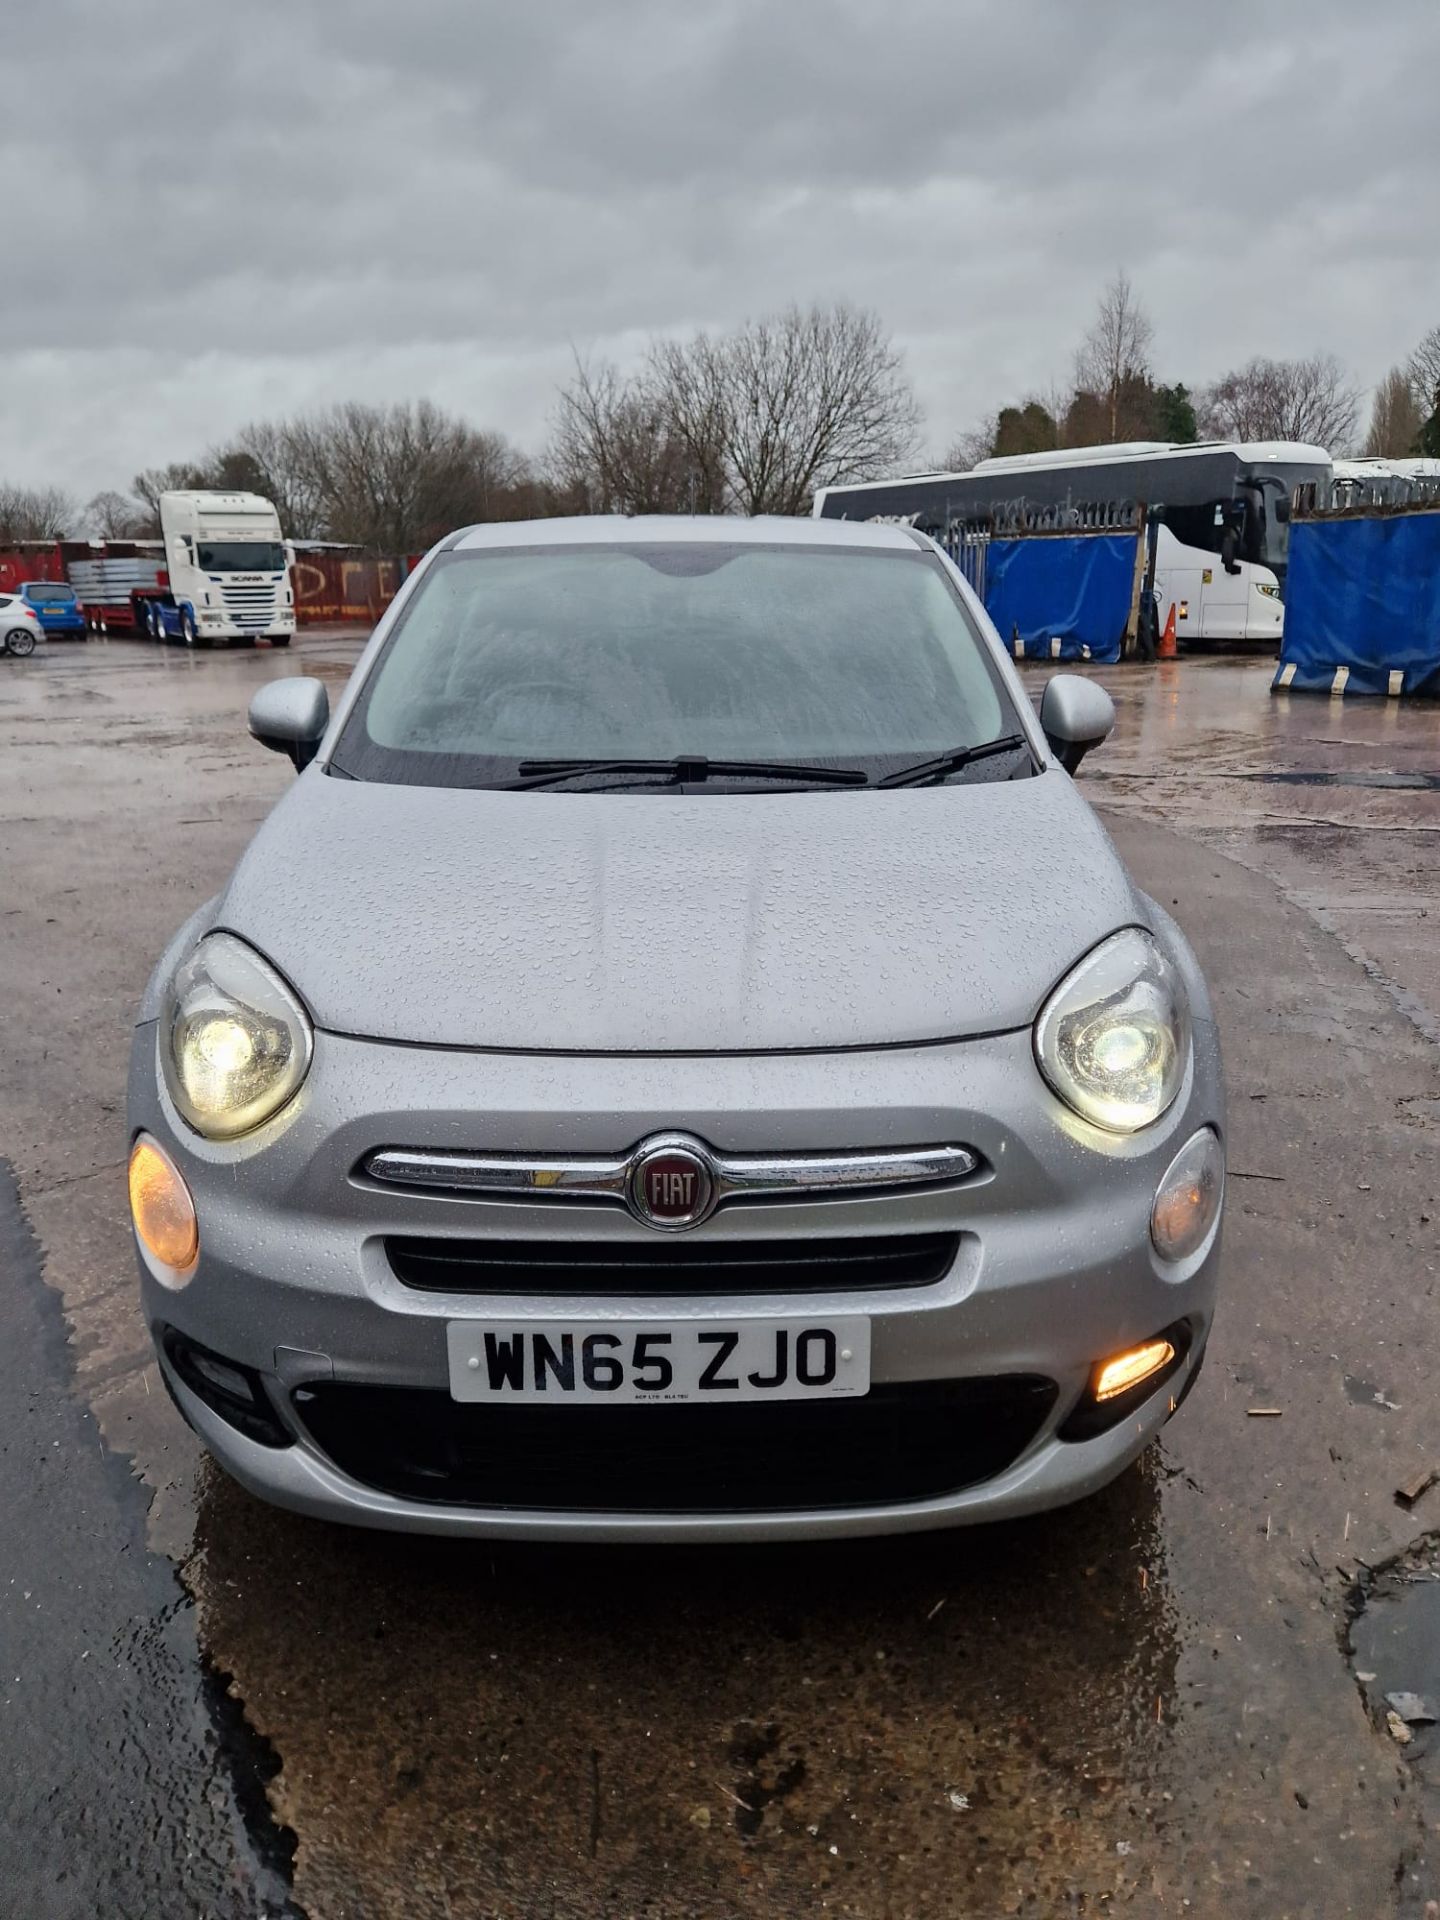 65 plate Fiat 500X Lounge multi air 1.4i, MOT until 1/10/2024, 84190 miles (unchecked), comes with 2